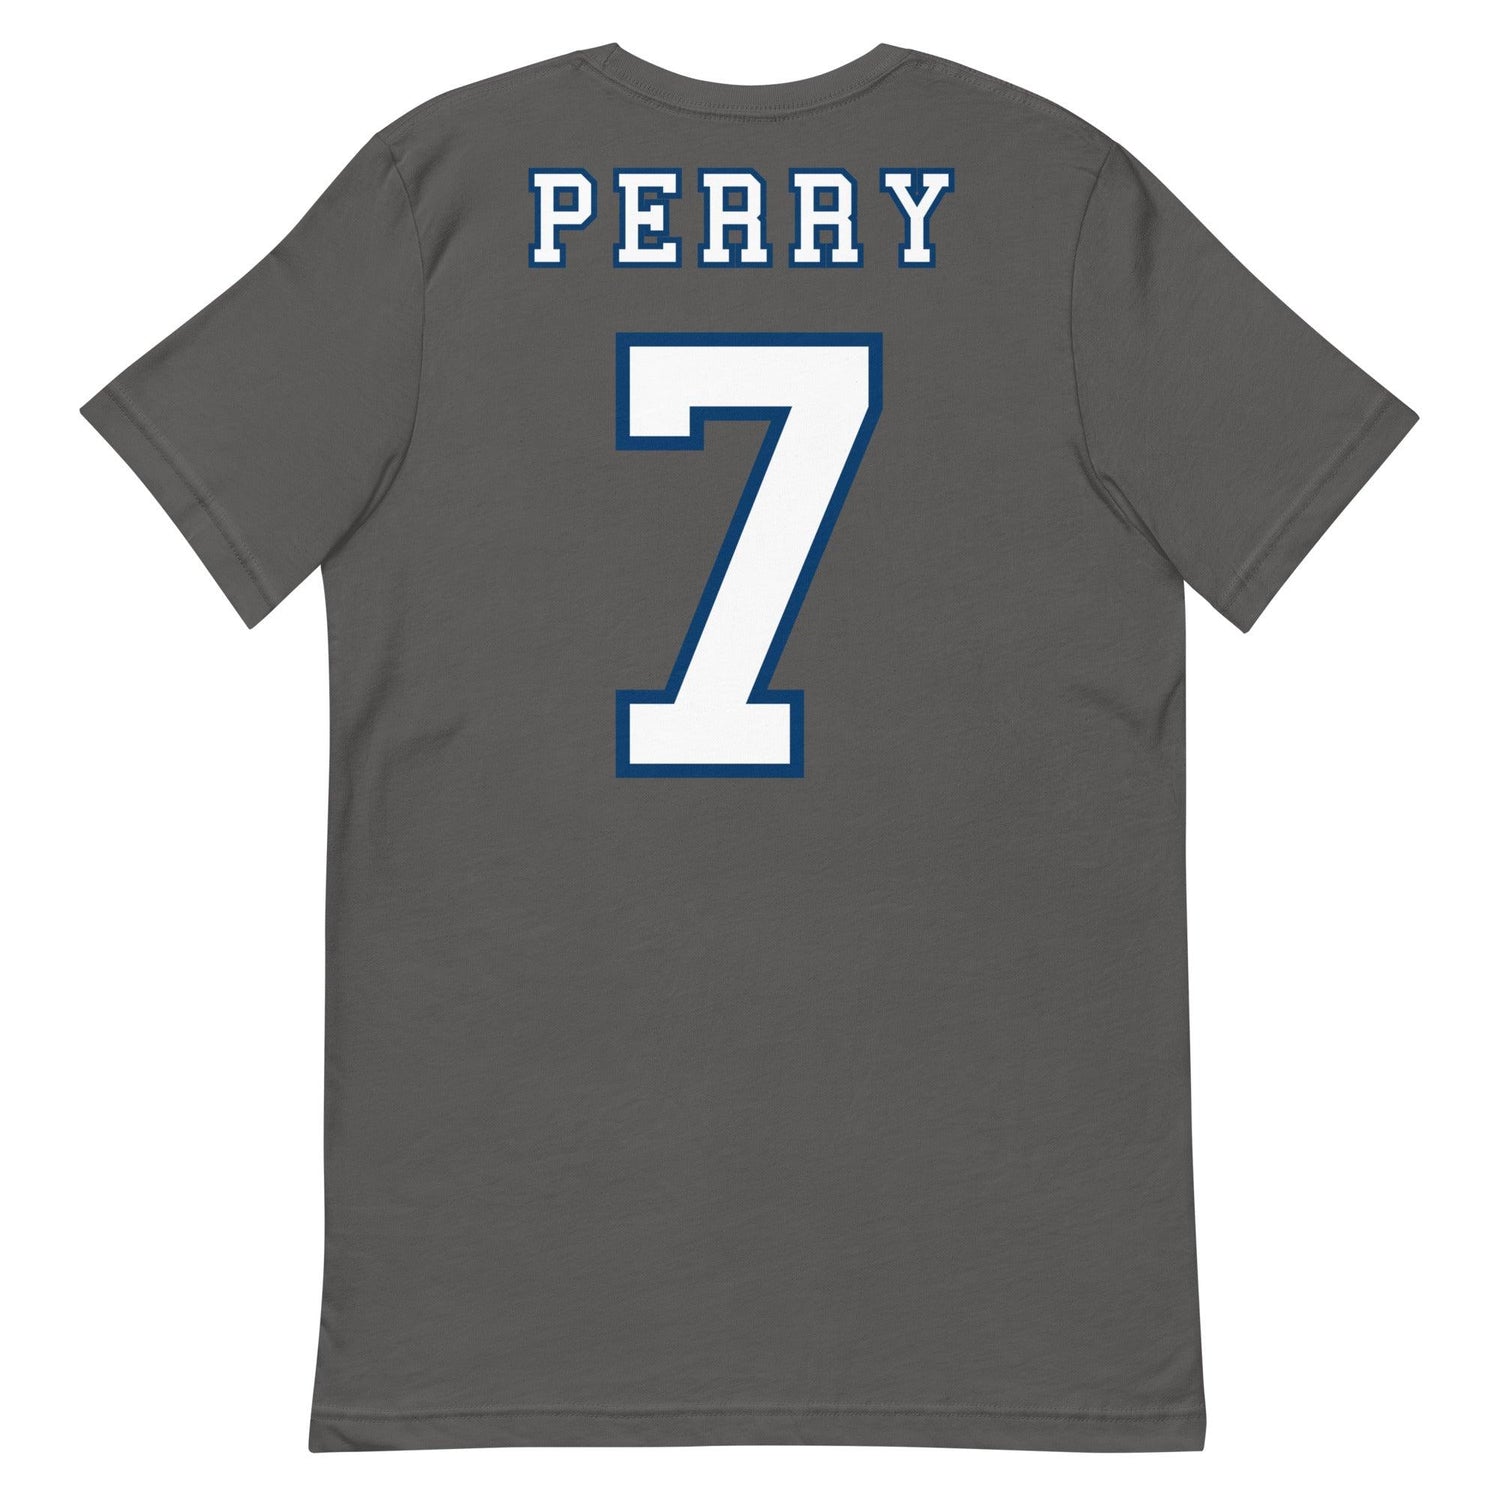 N'Kosi Perry "Jersey" t-shirt - Fan Arch